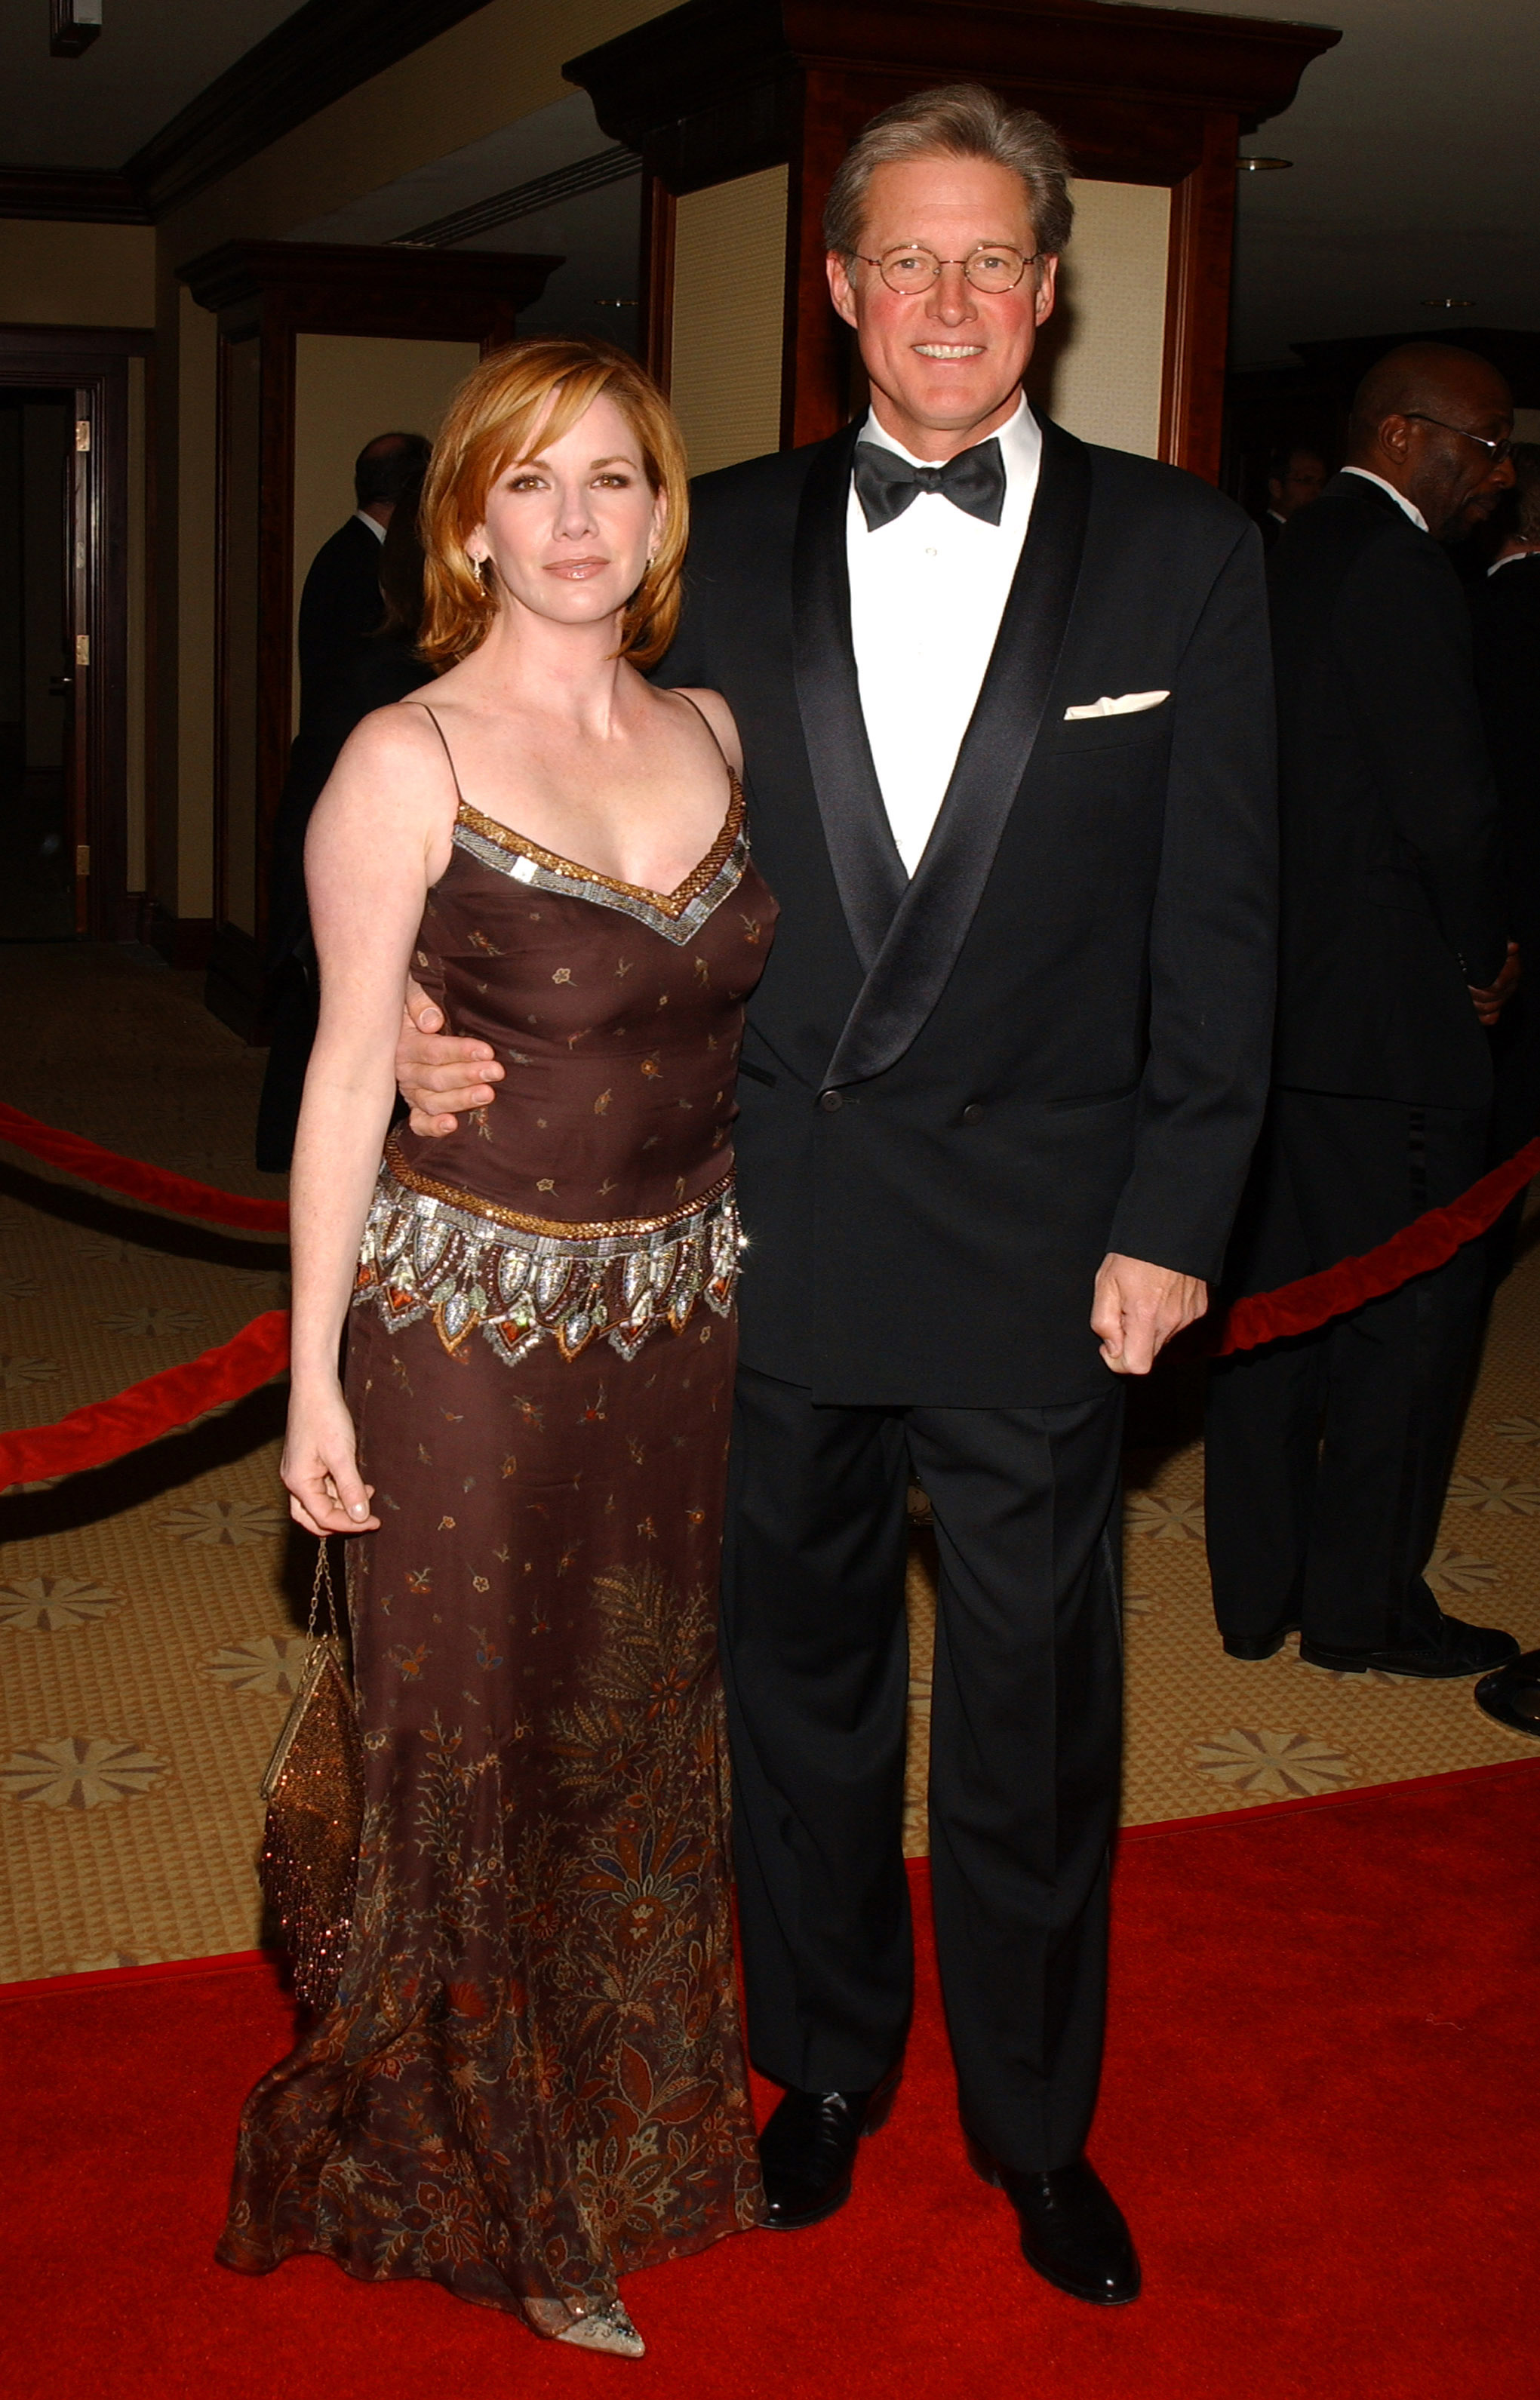 Melissa Gilbert and her second husband, Bruce Boxleitner, at the 56th Annual Directors Guild of America Awards | Source: Getty Images